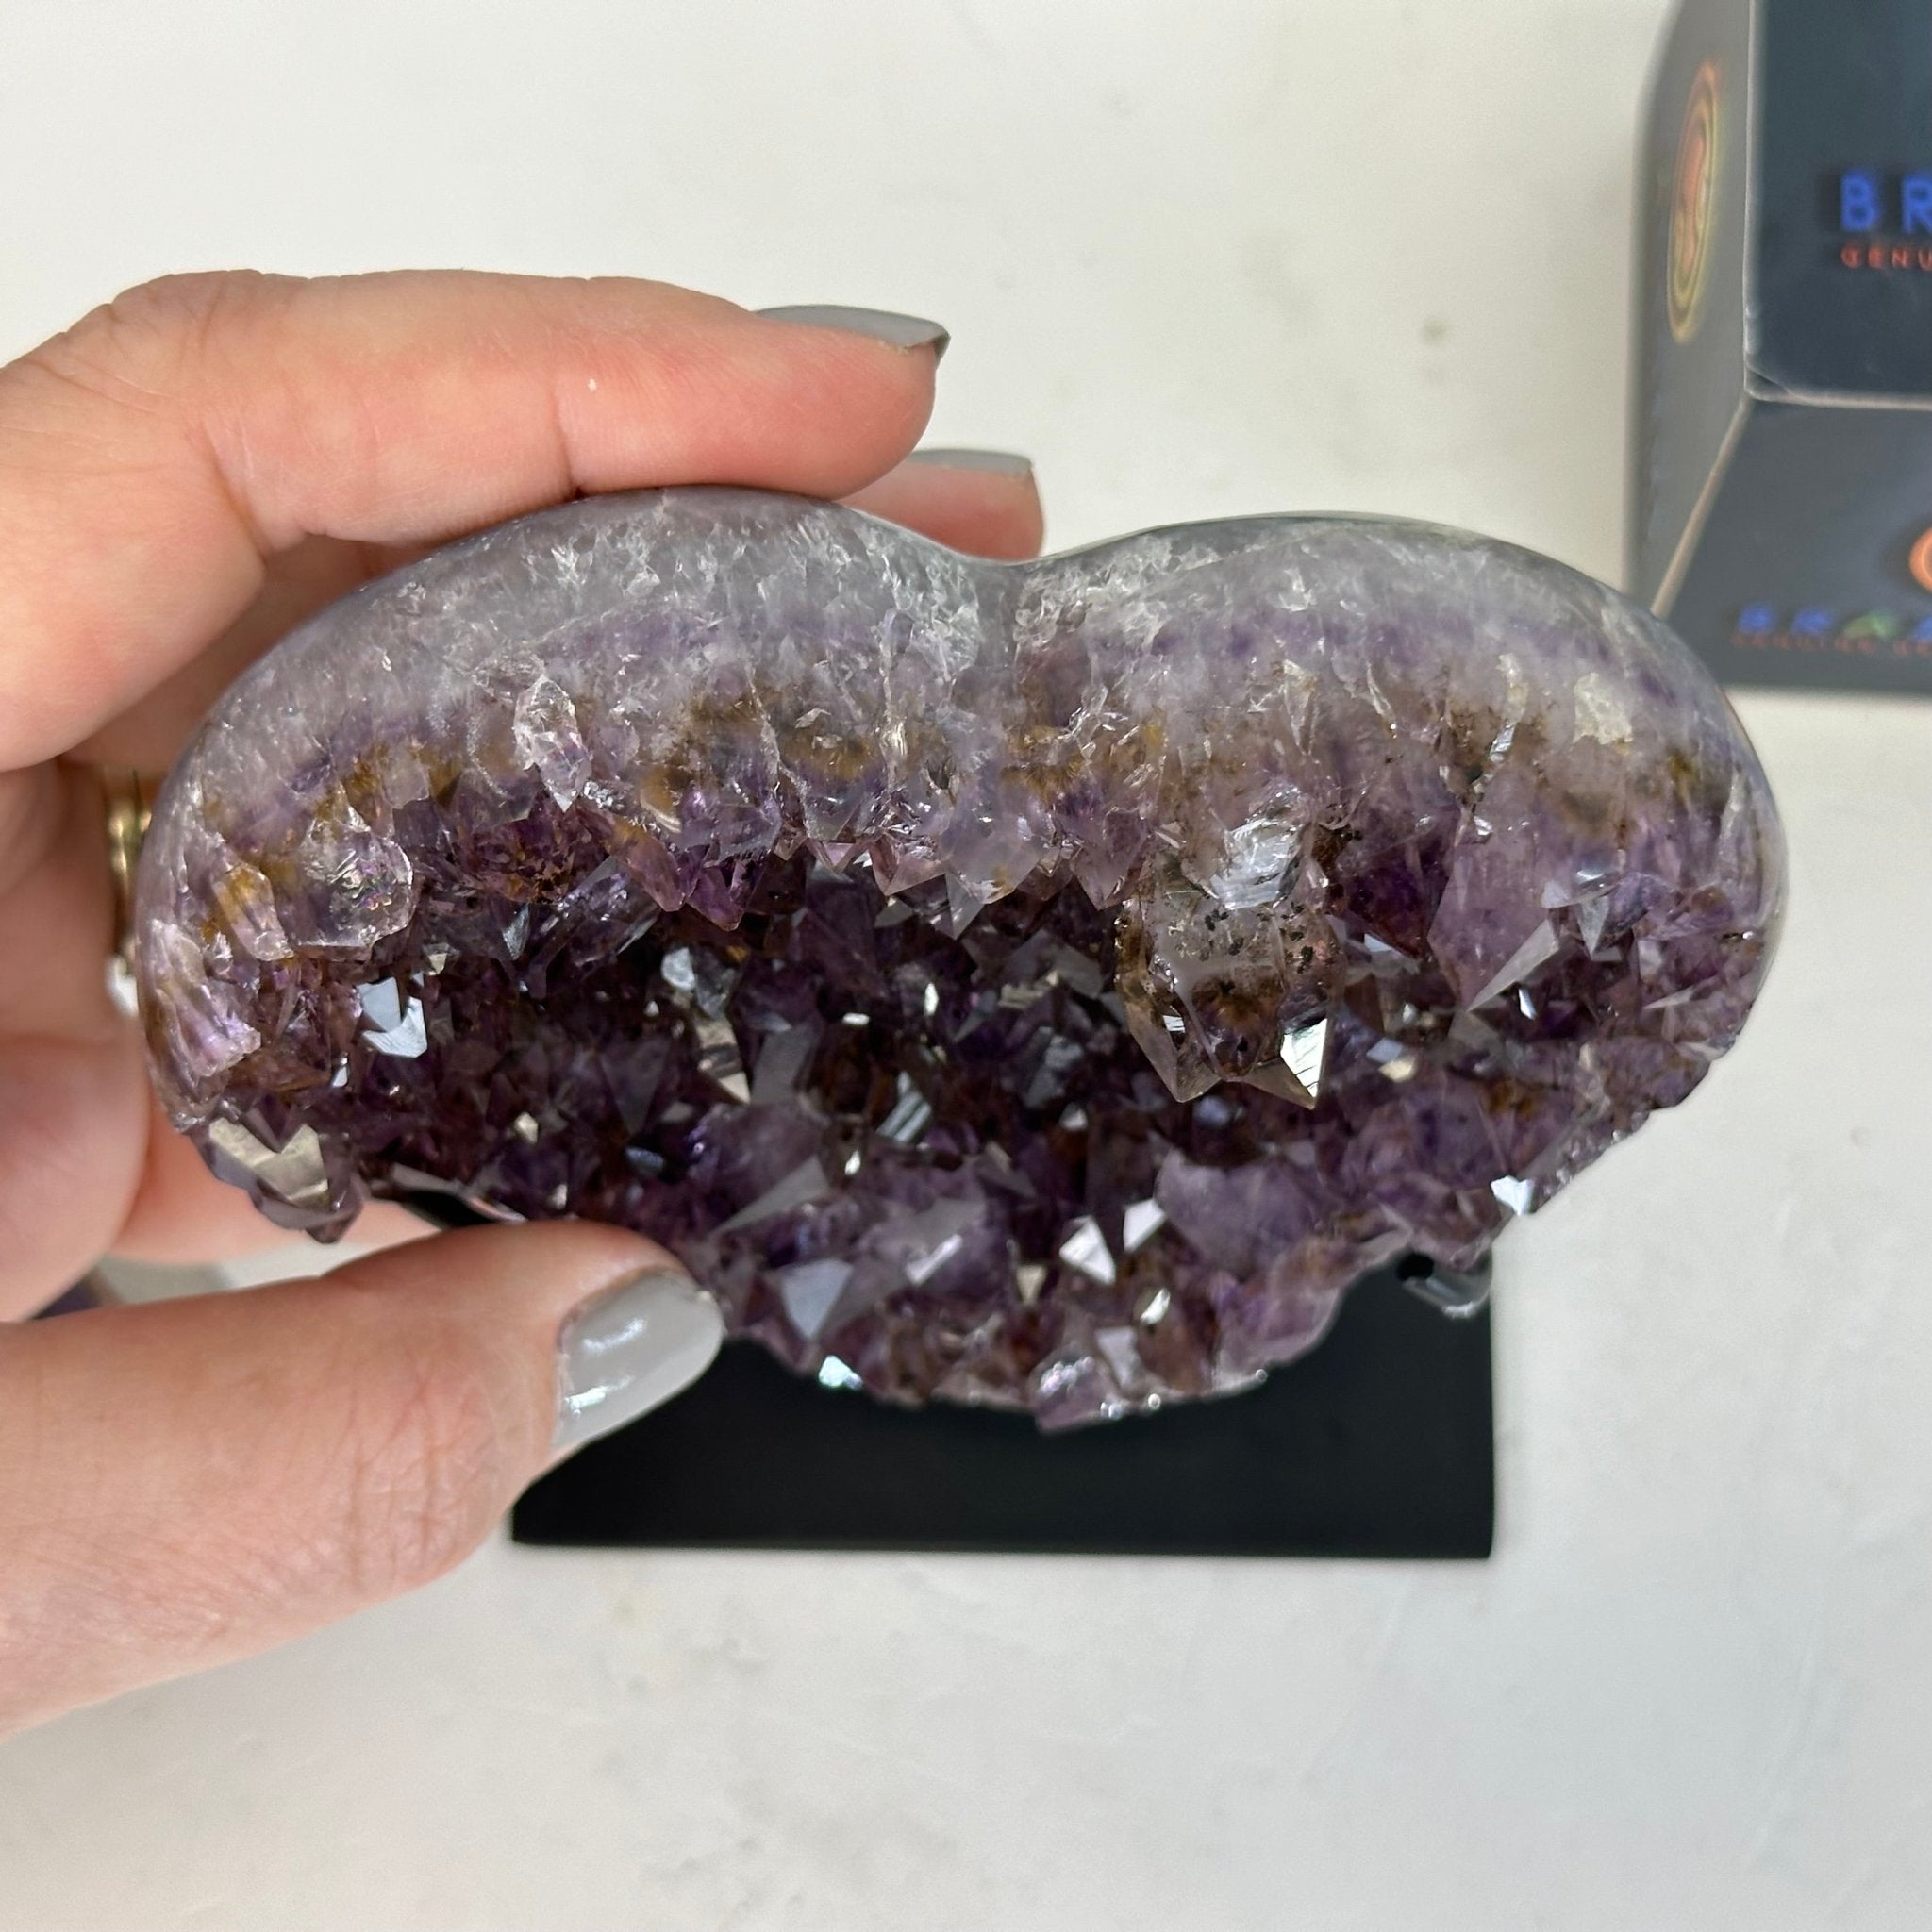 Extra Quality Amethyst Heart Geode w/ metal stand, 1.3 lbs & 5.2" Tall #5463-0298 - Brazil GemsBrazil GemsExtra Quality Amethyst Heart Geode w/ metal stand, 1.3 lbs & 5.2" Tall #5463-0298Hearts5463-0298